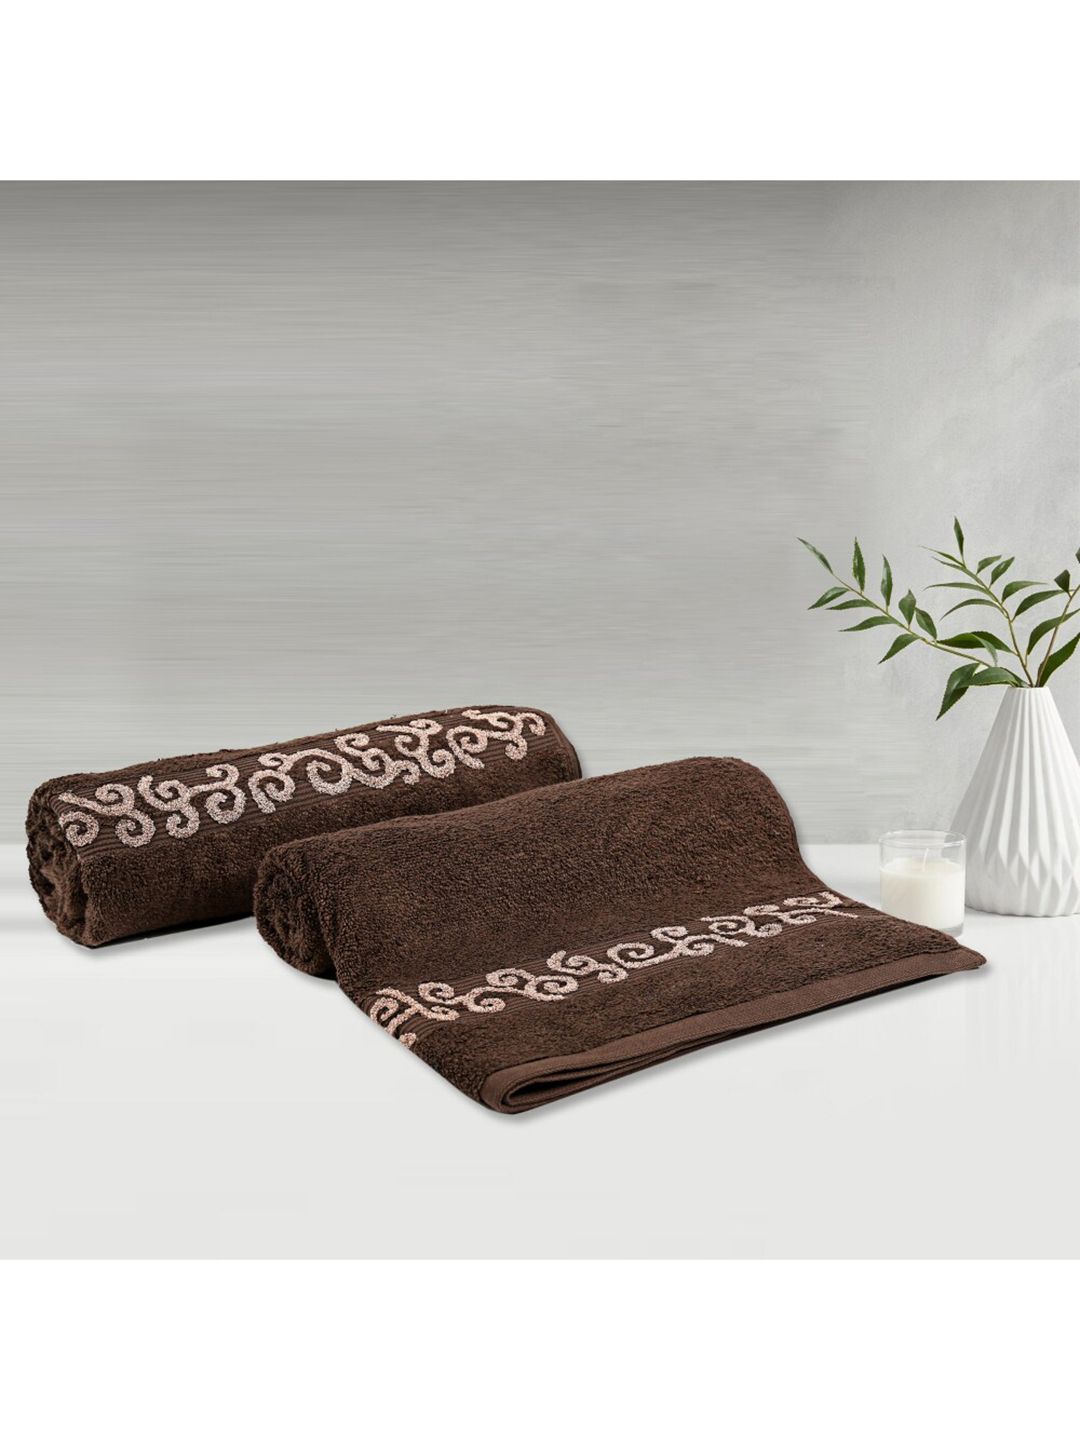 LUSH & BEYOND Set of 2 Brown & White Printed 500 GSM Pure Cotton Bath Towels Price in India